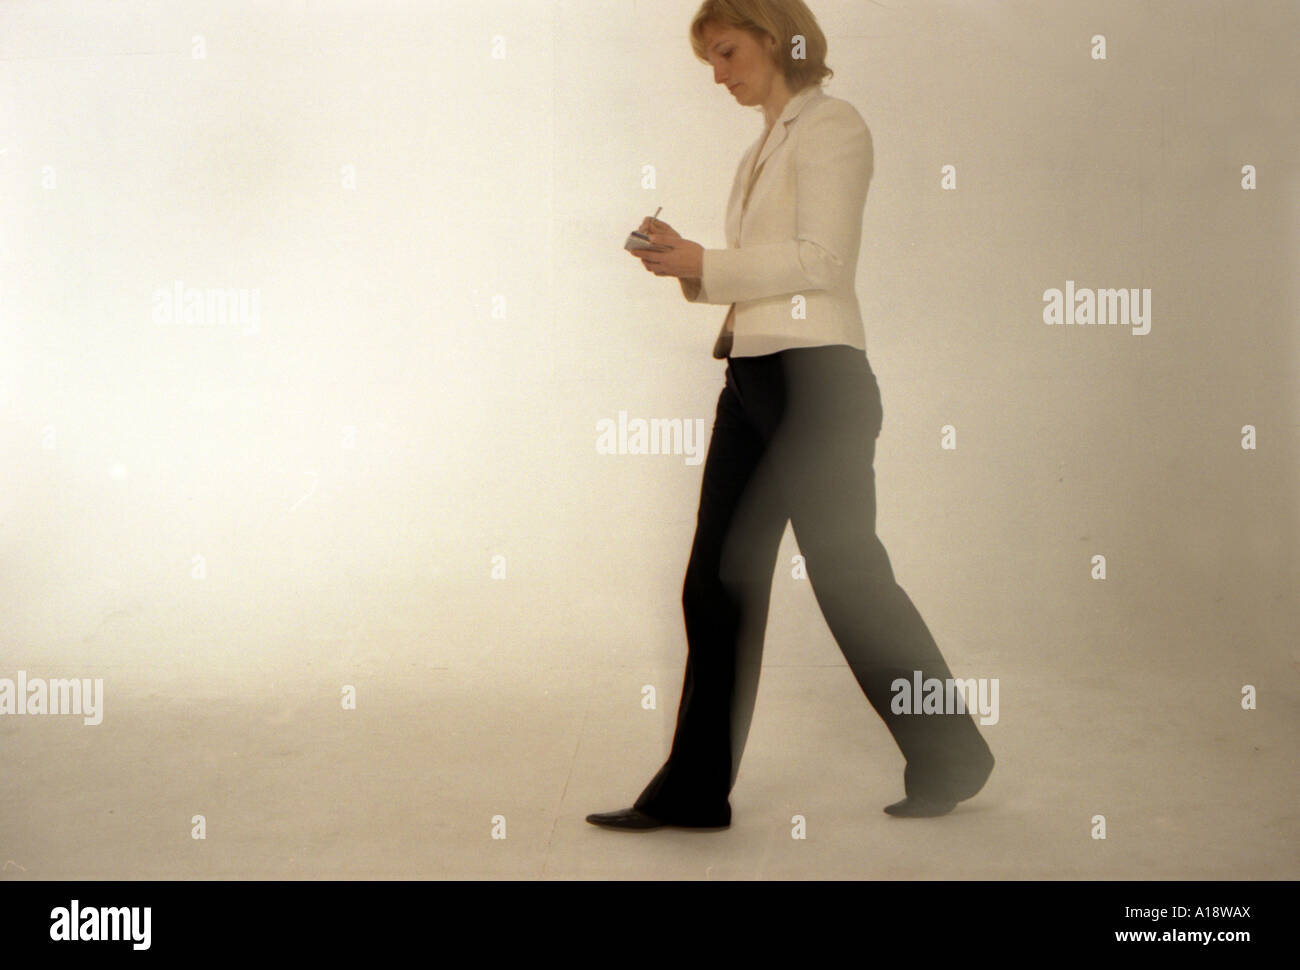 A business woman walking consulting a palmtop computer Stock Photo